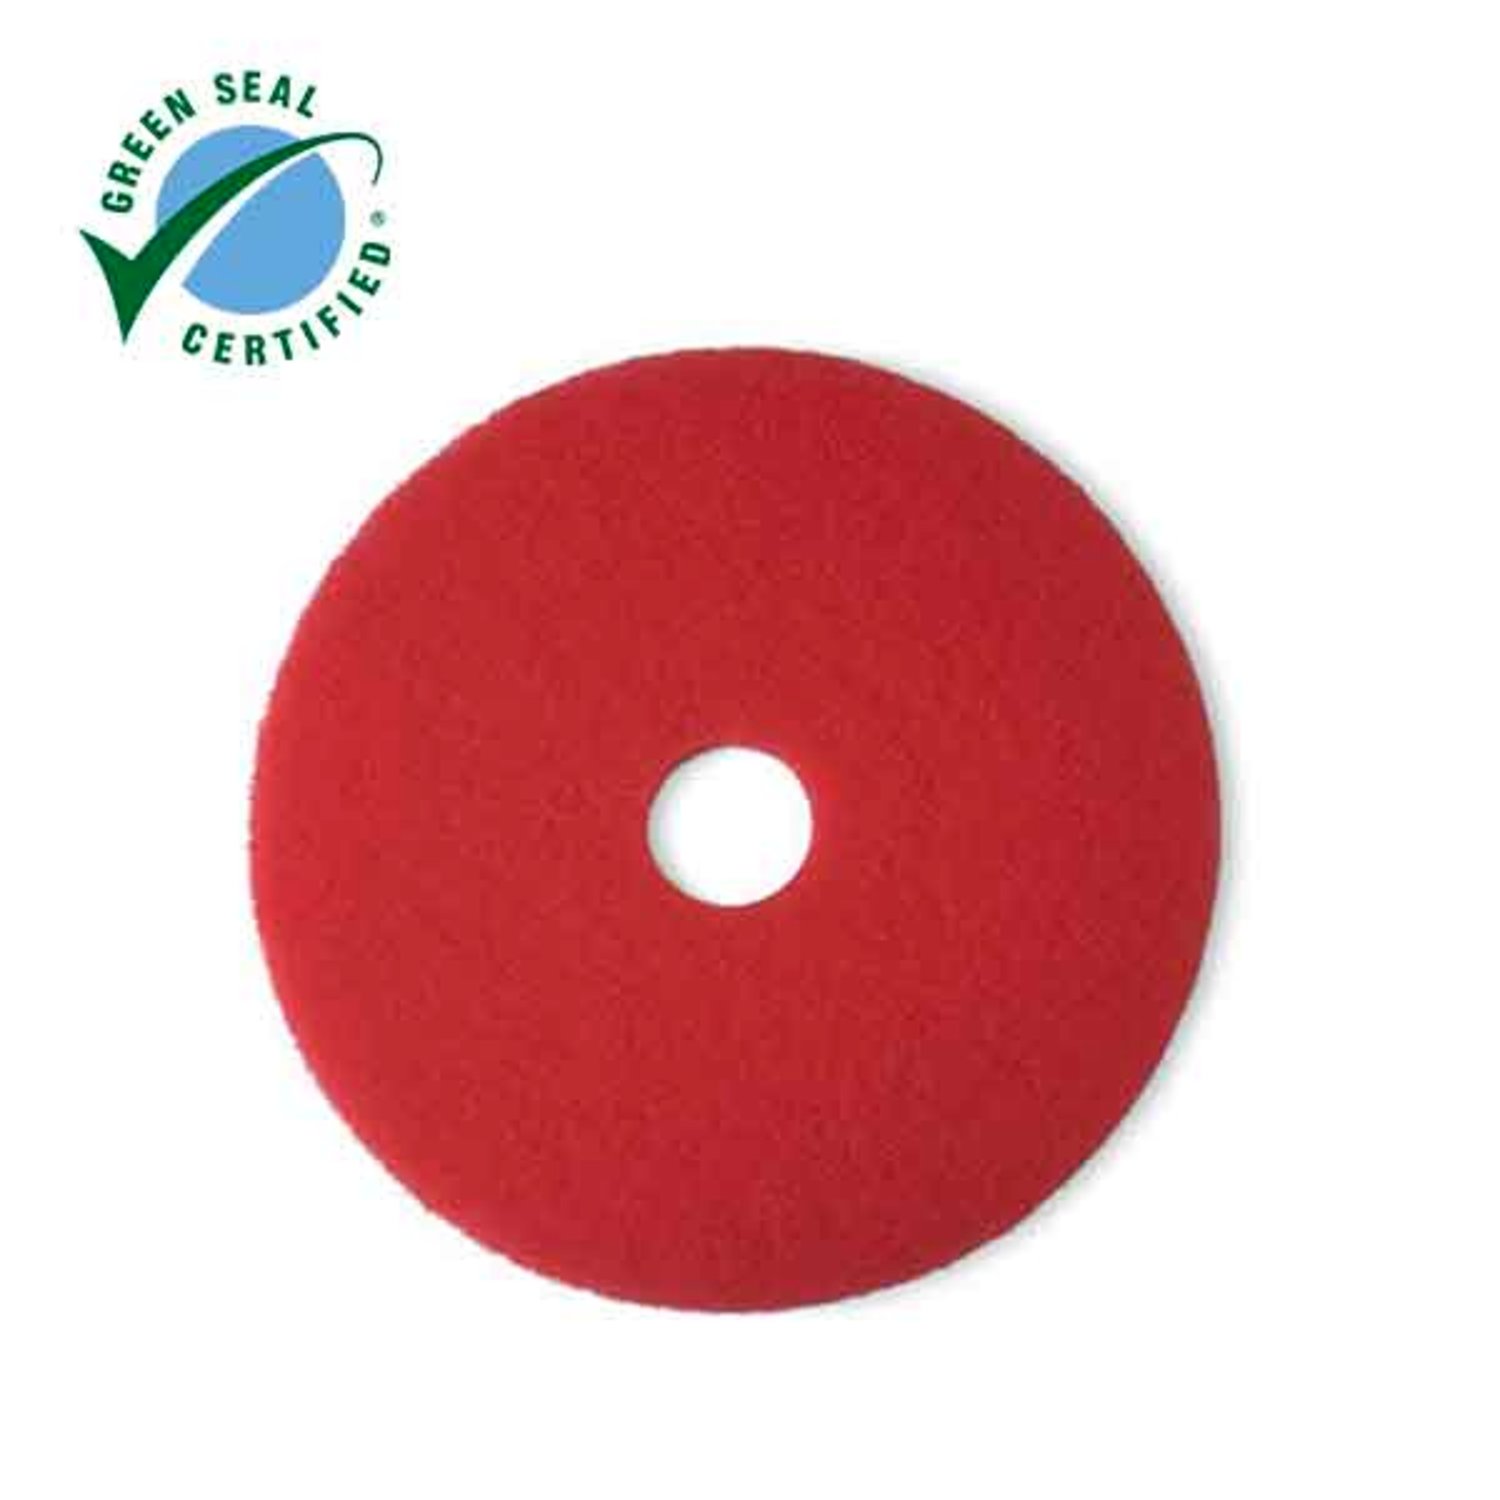 7000000681 - 3M Red Buffer Pad 5100, Red, 455 mm x 82 mm, 18 in, 5 ea/Case